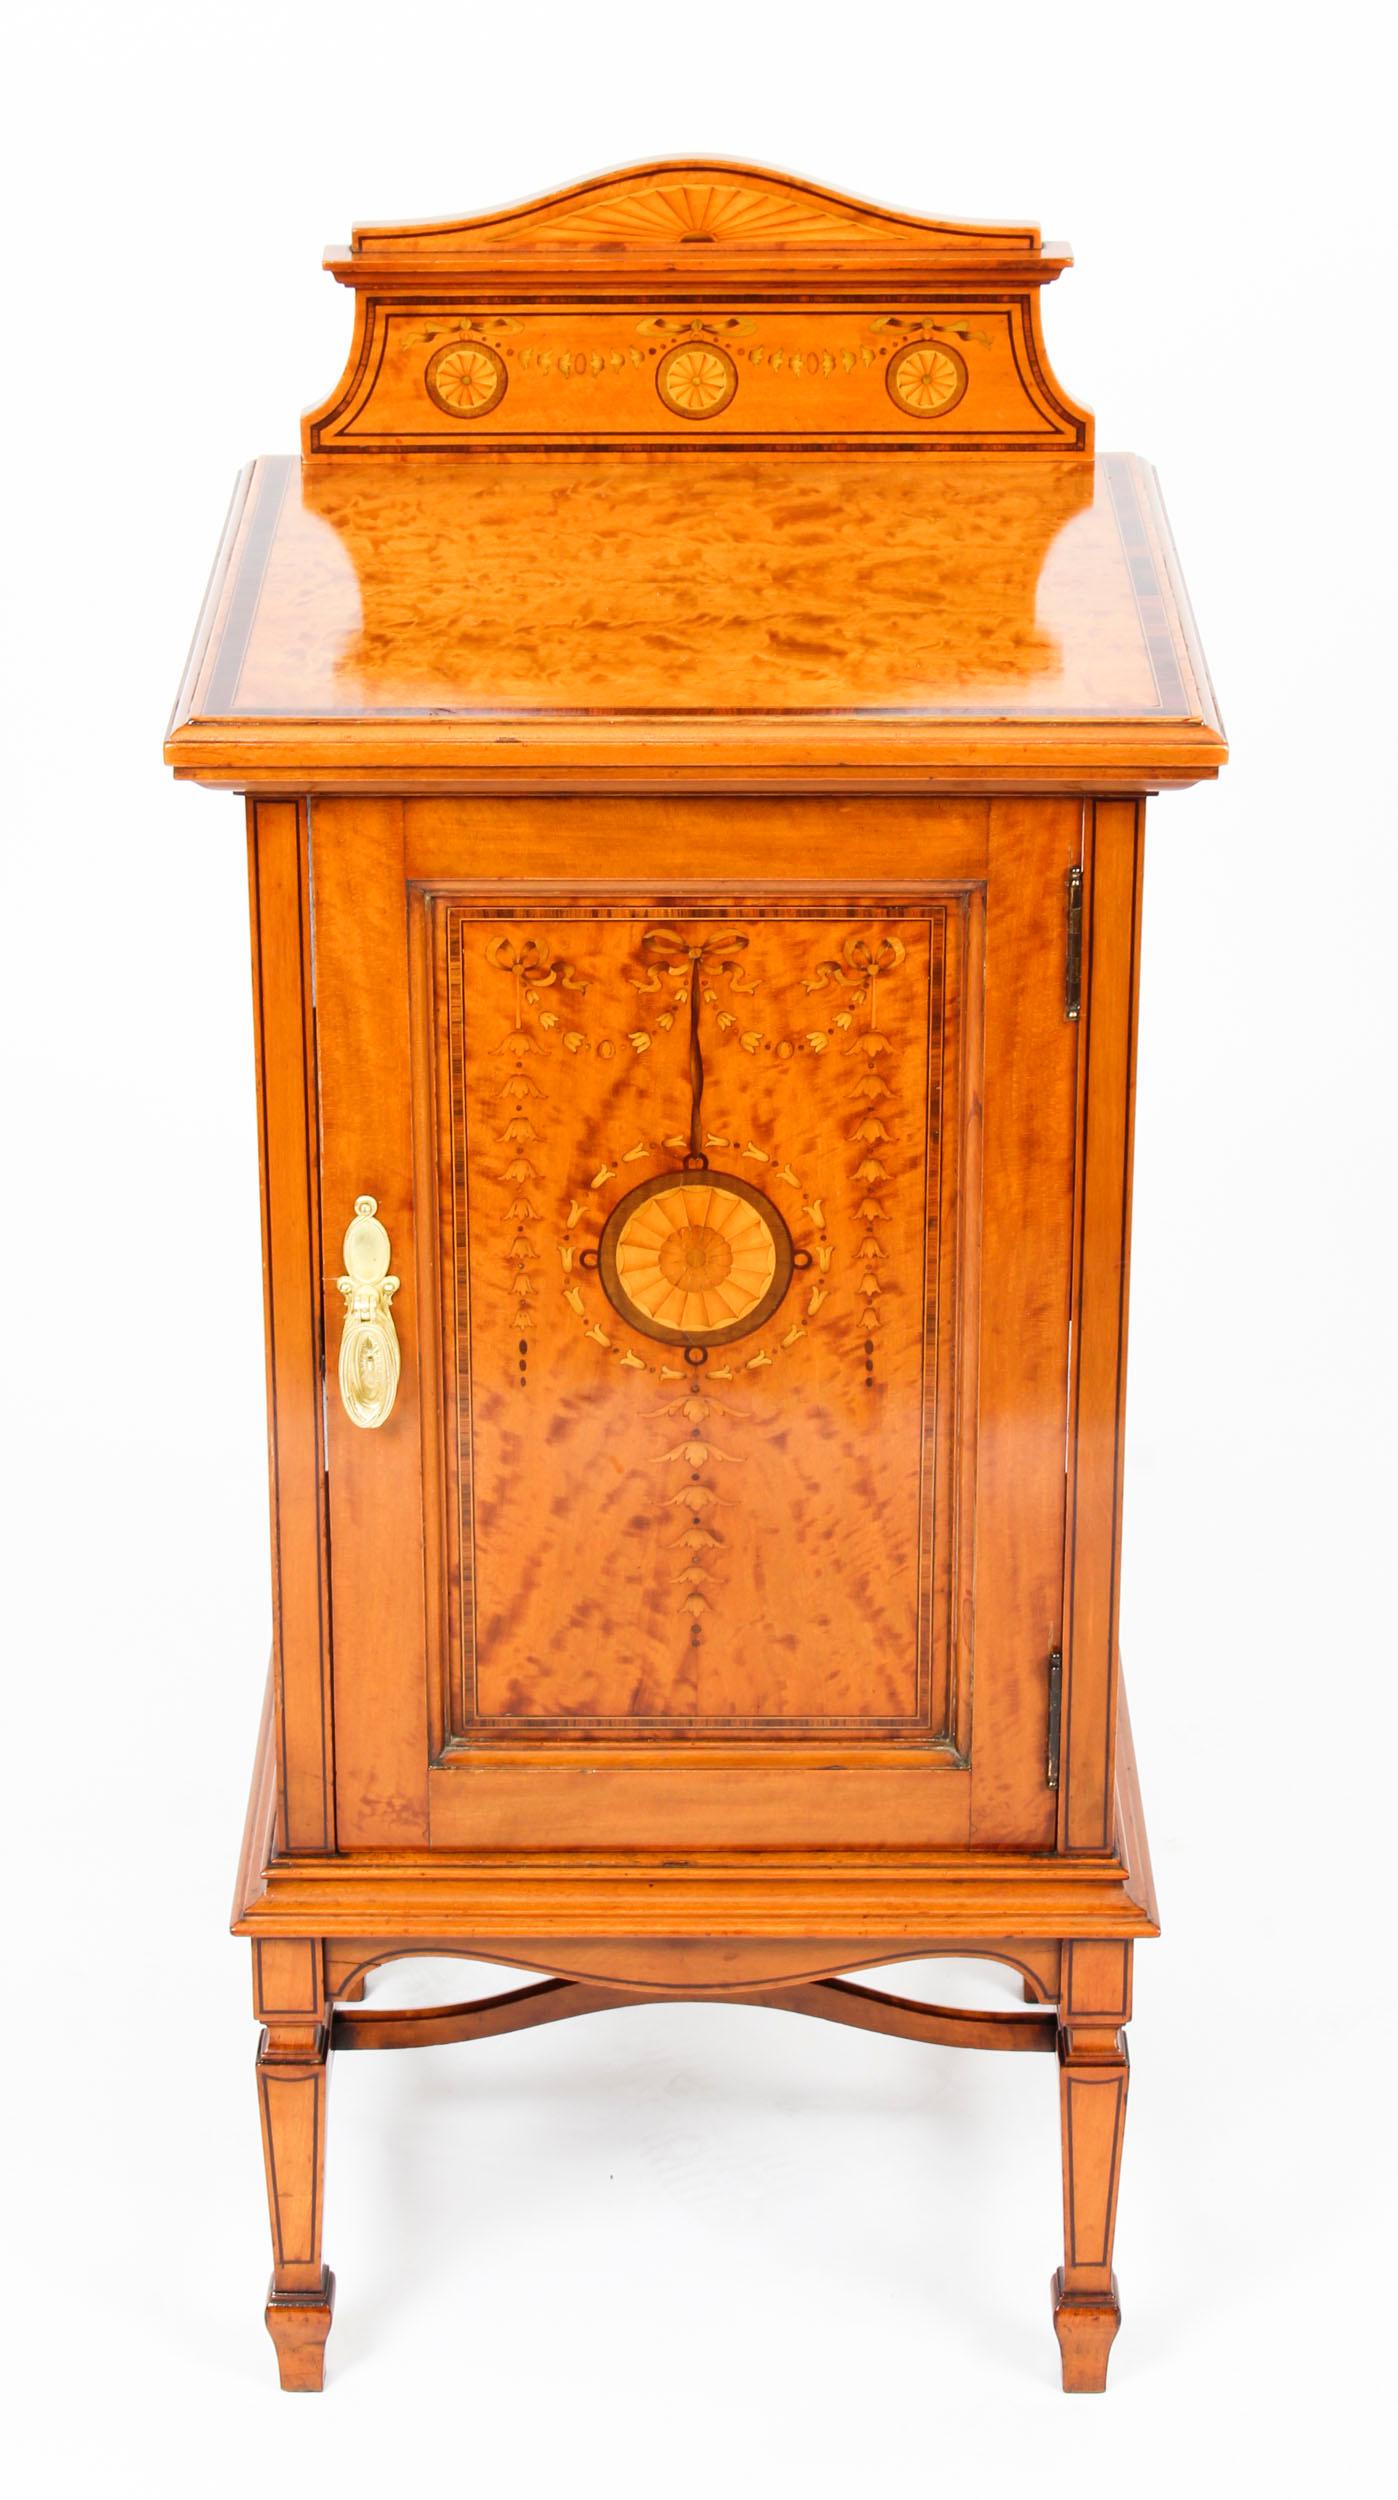 This is a splendid antique Victorian satinwood bedside cabinet, circa 1880 in date.

This superb antique cabinet features attractive marquetry decoration.

The bedside cabinet has a cupboard with a central shelf and is raised on elegant square